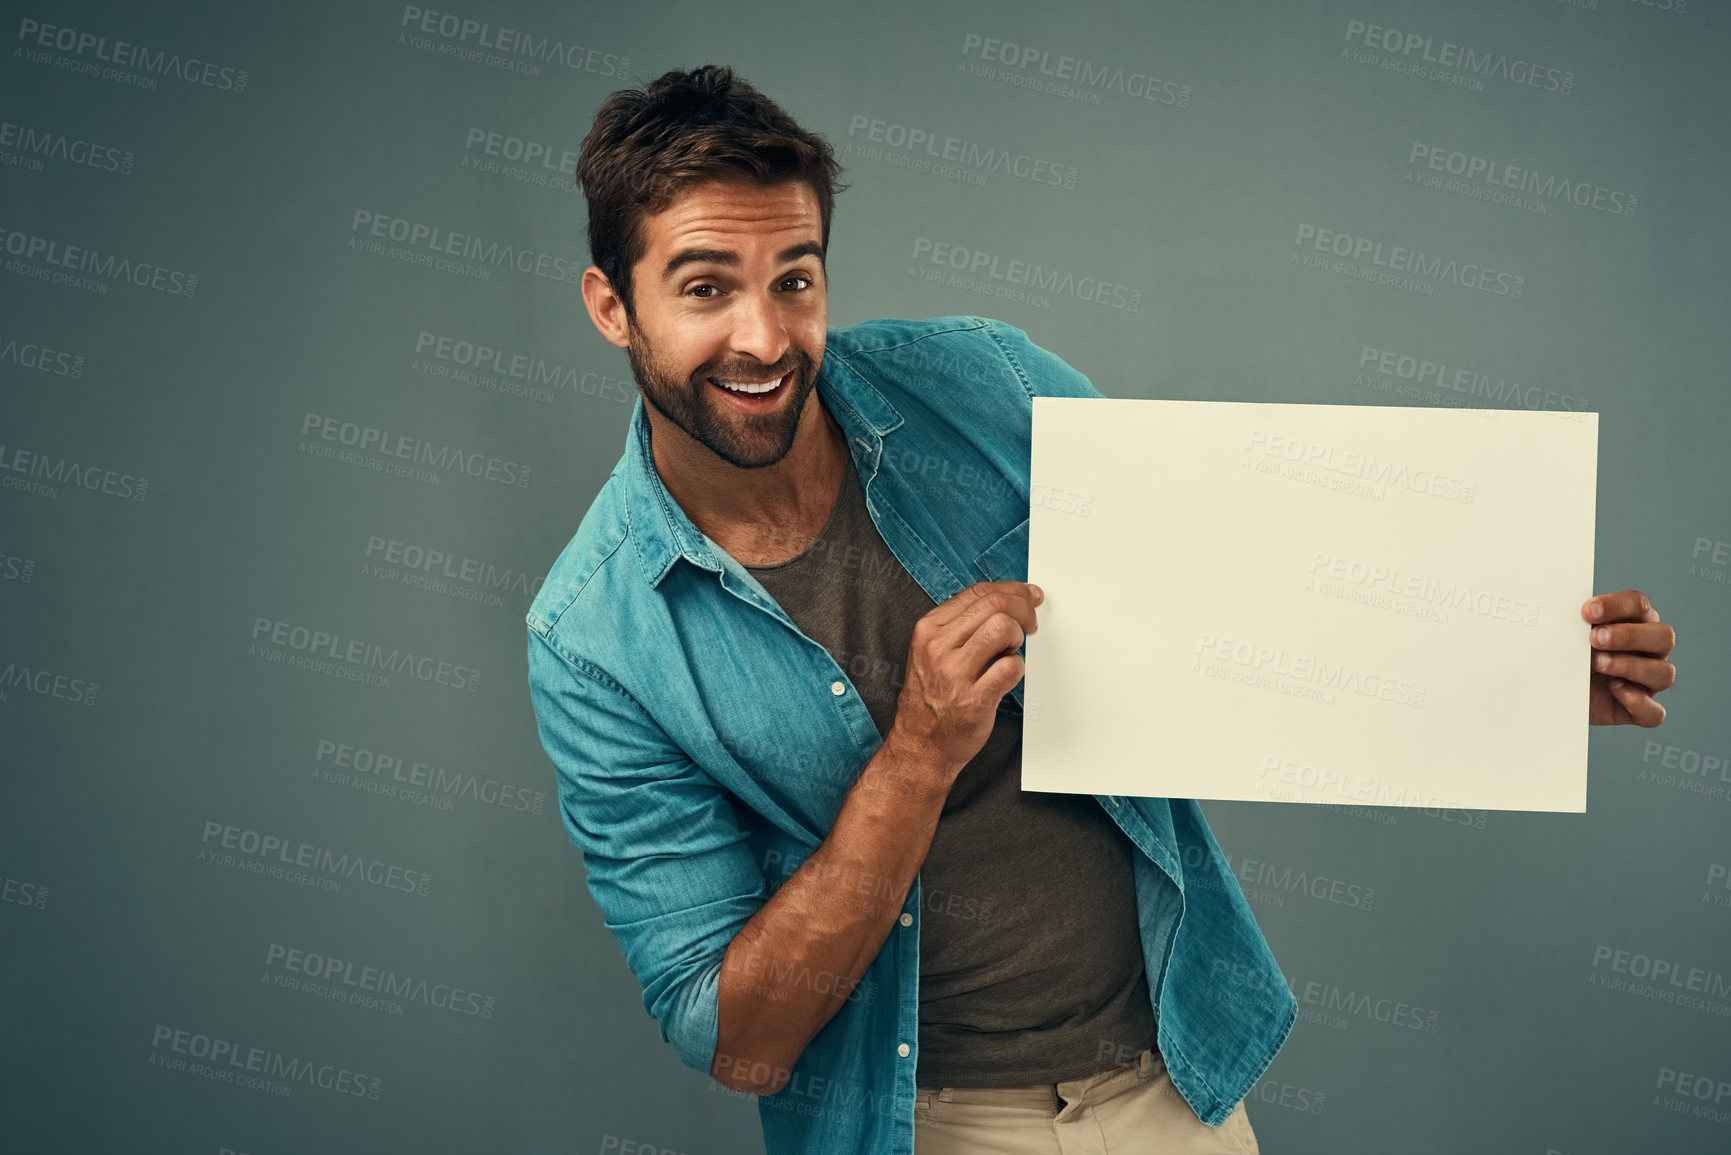 Buy stock photo Studio portrait of a handsome young man holding a blank placard against a grey background